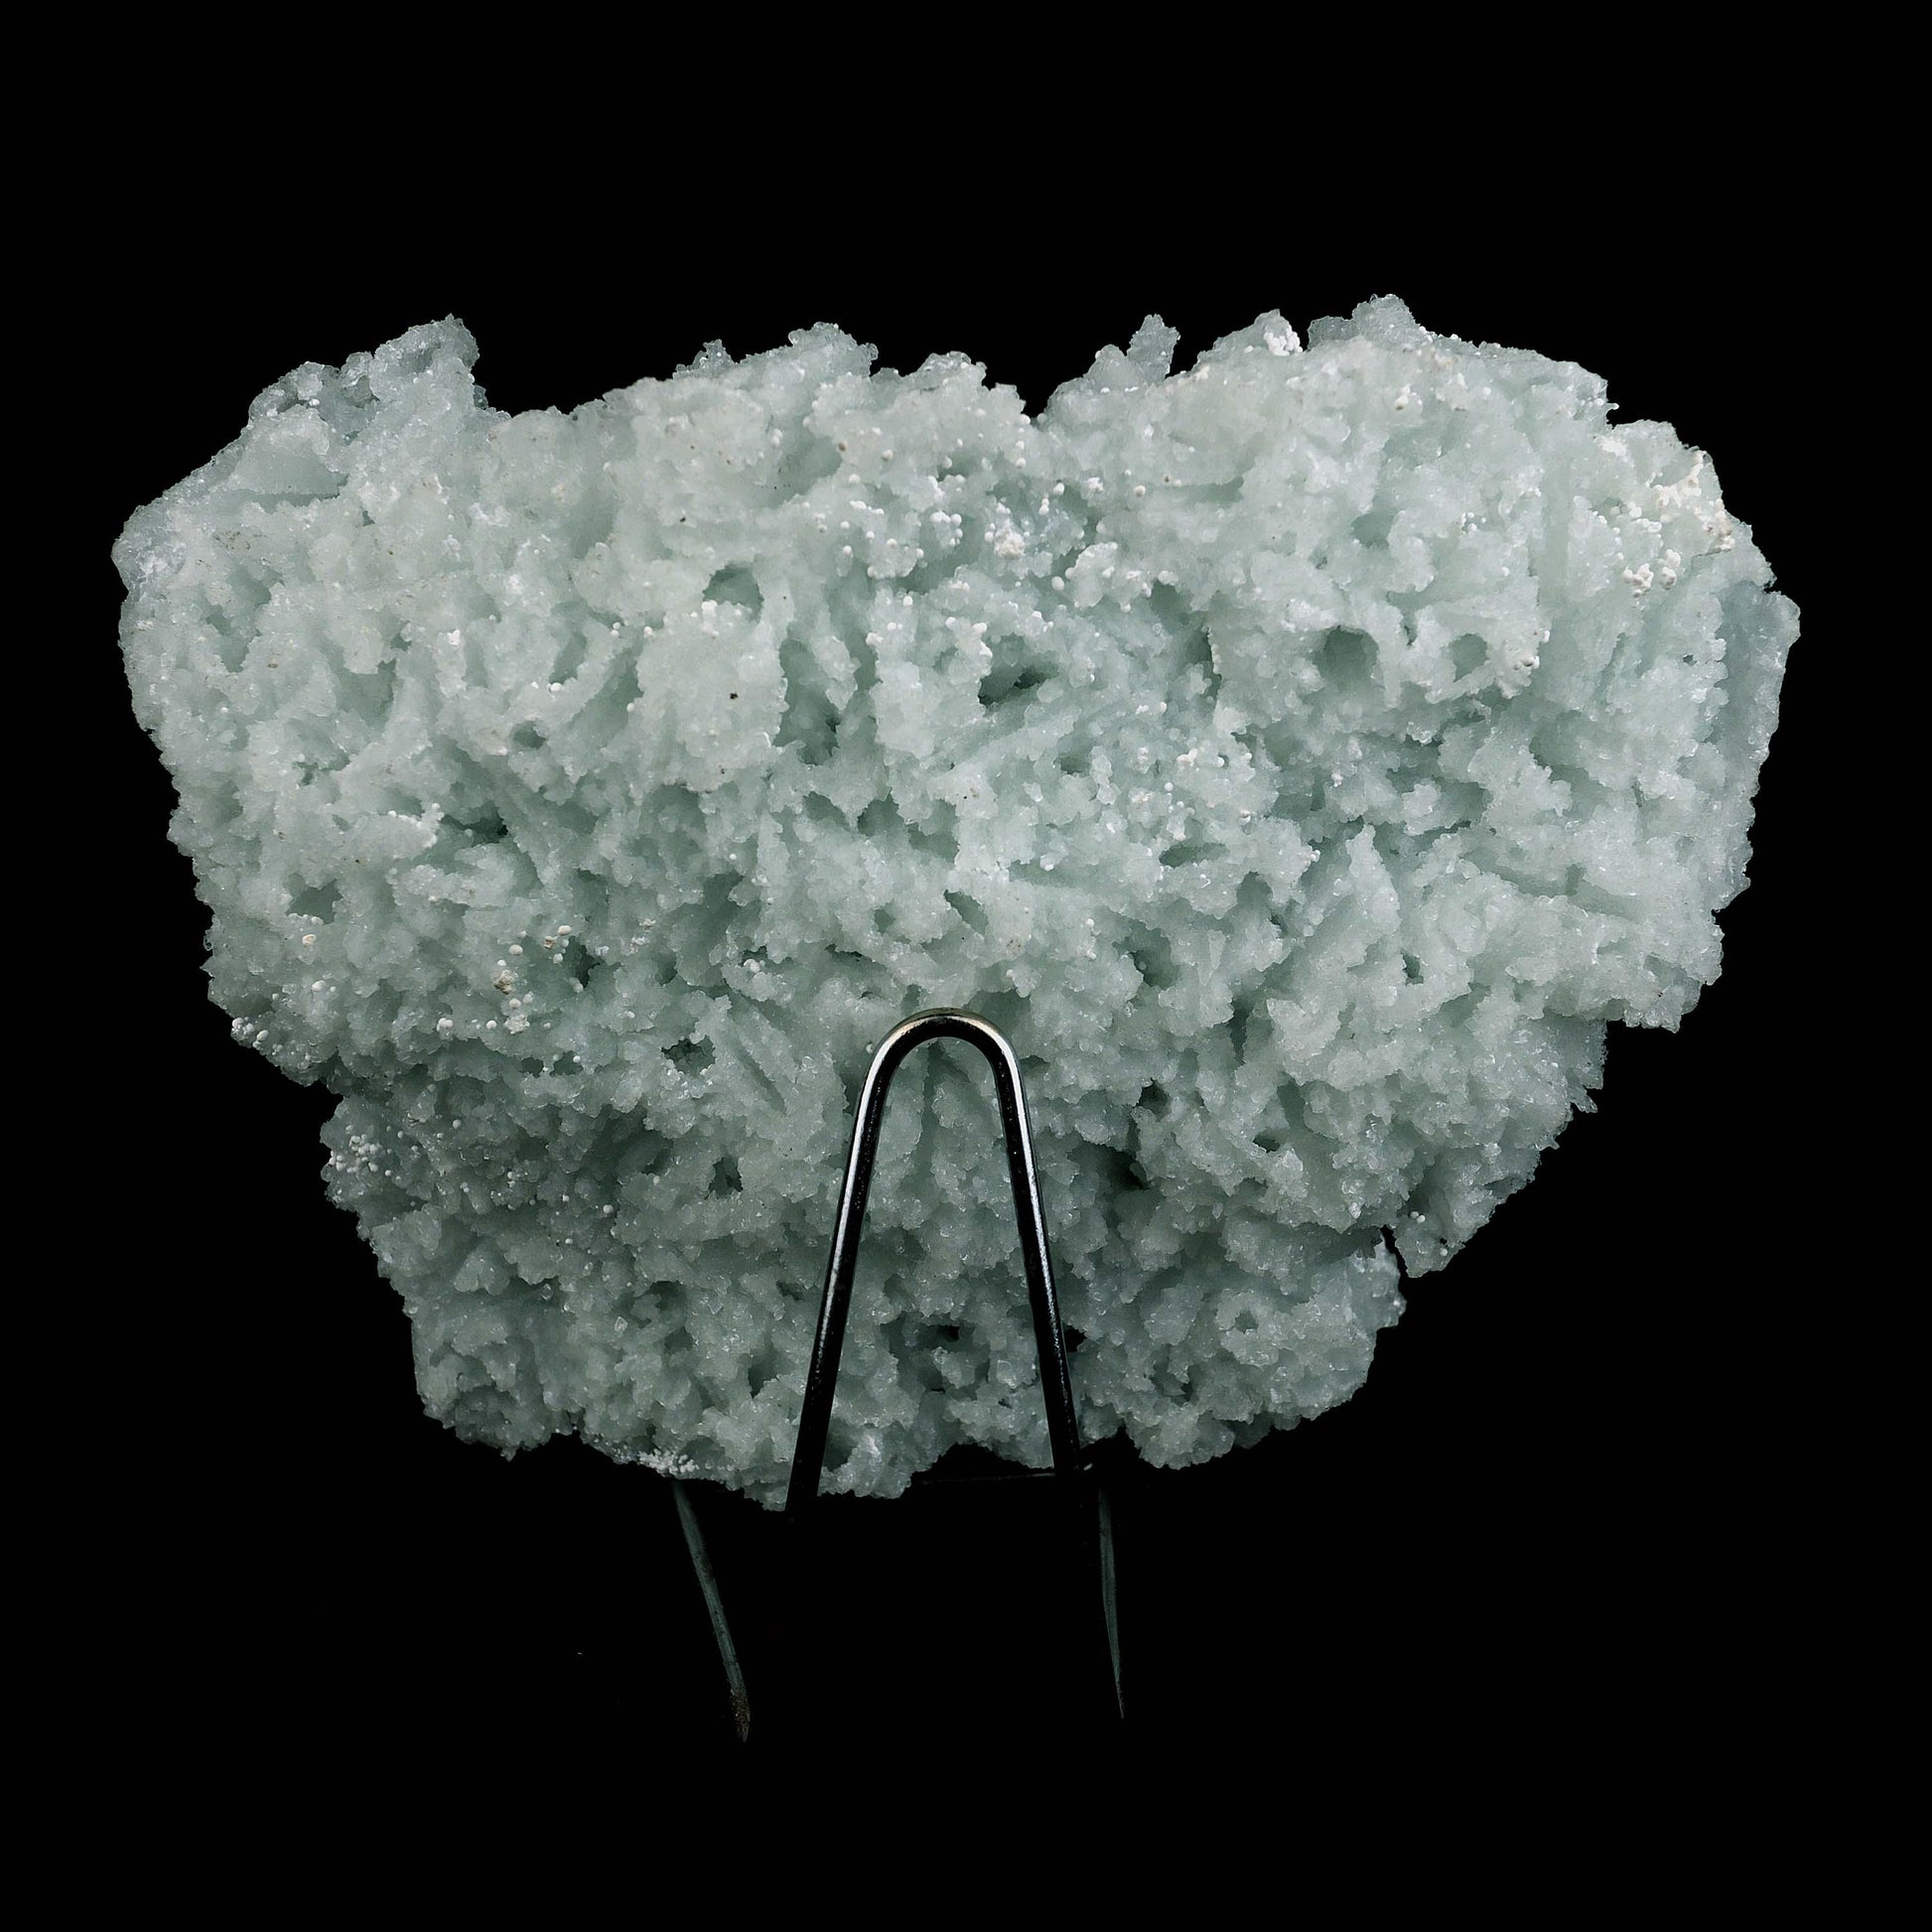 Prehnite Rare Find Natural Mineral Specimen # B 4607  https://www.superbminerals.us/products/prehnite-rare-find-natural-mineral-specimen-b-4607  Features:Precious jackstraw cluster of elongated laumontite crystals that pseudomorphed from mint-green, translucent prehnite crystals. Malad Quarry in Mumbai is well-known for its classic and exceptional vintage material.The quarry's closure.